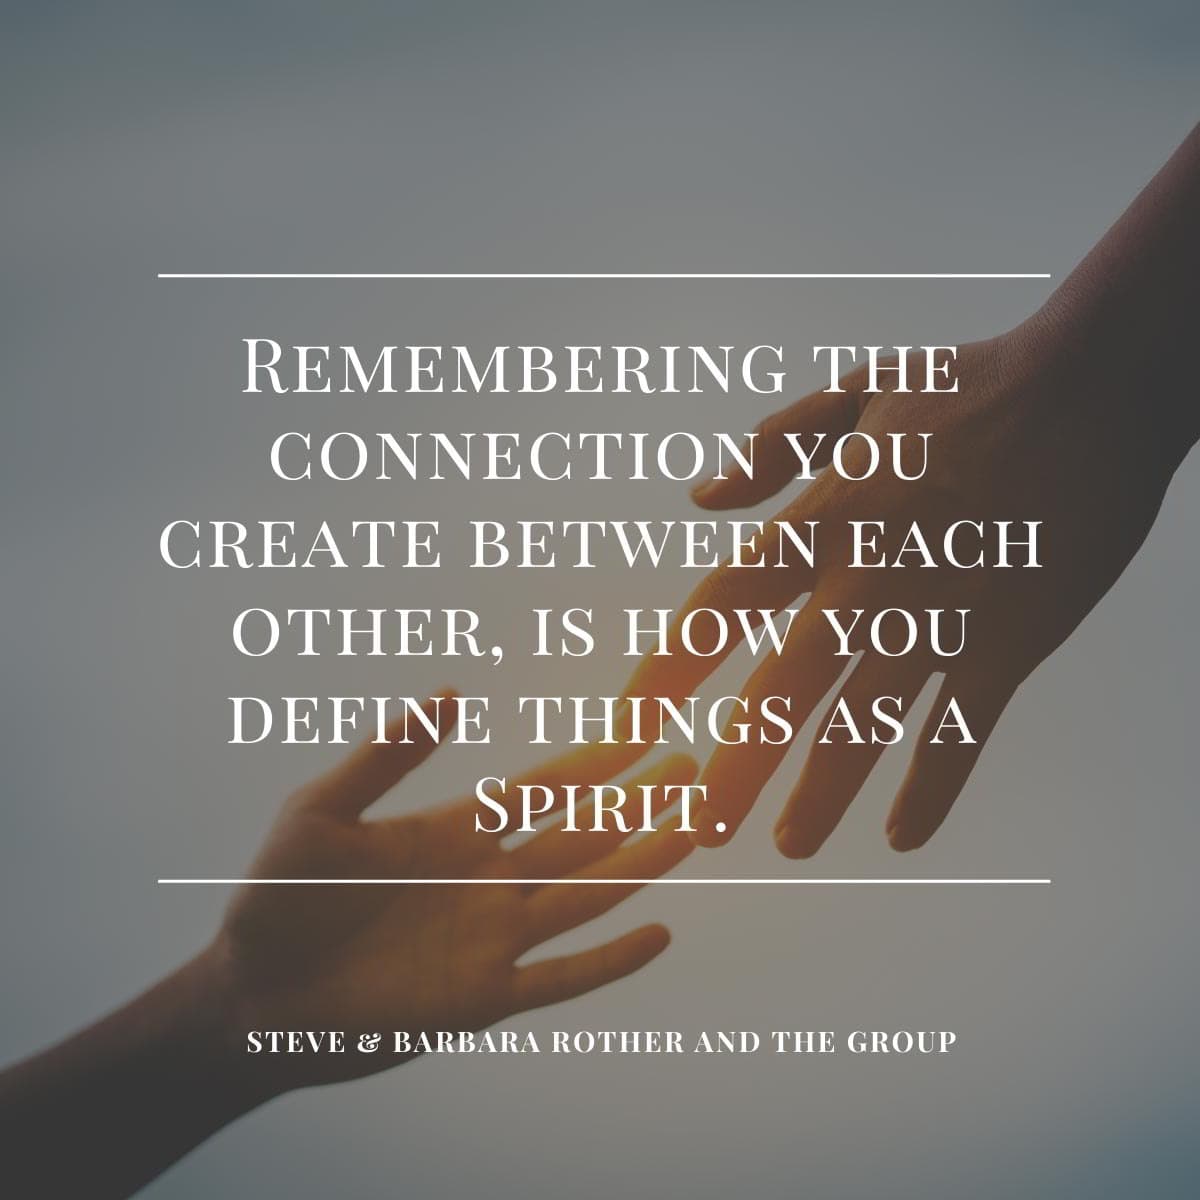 Remembering the connection you create